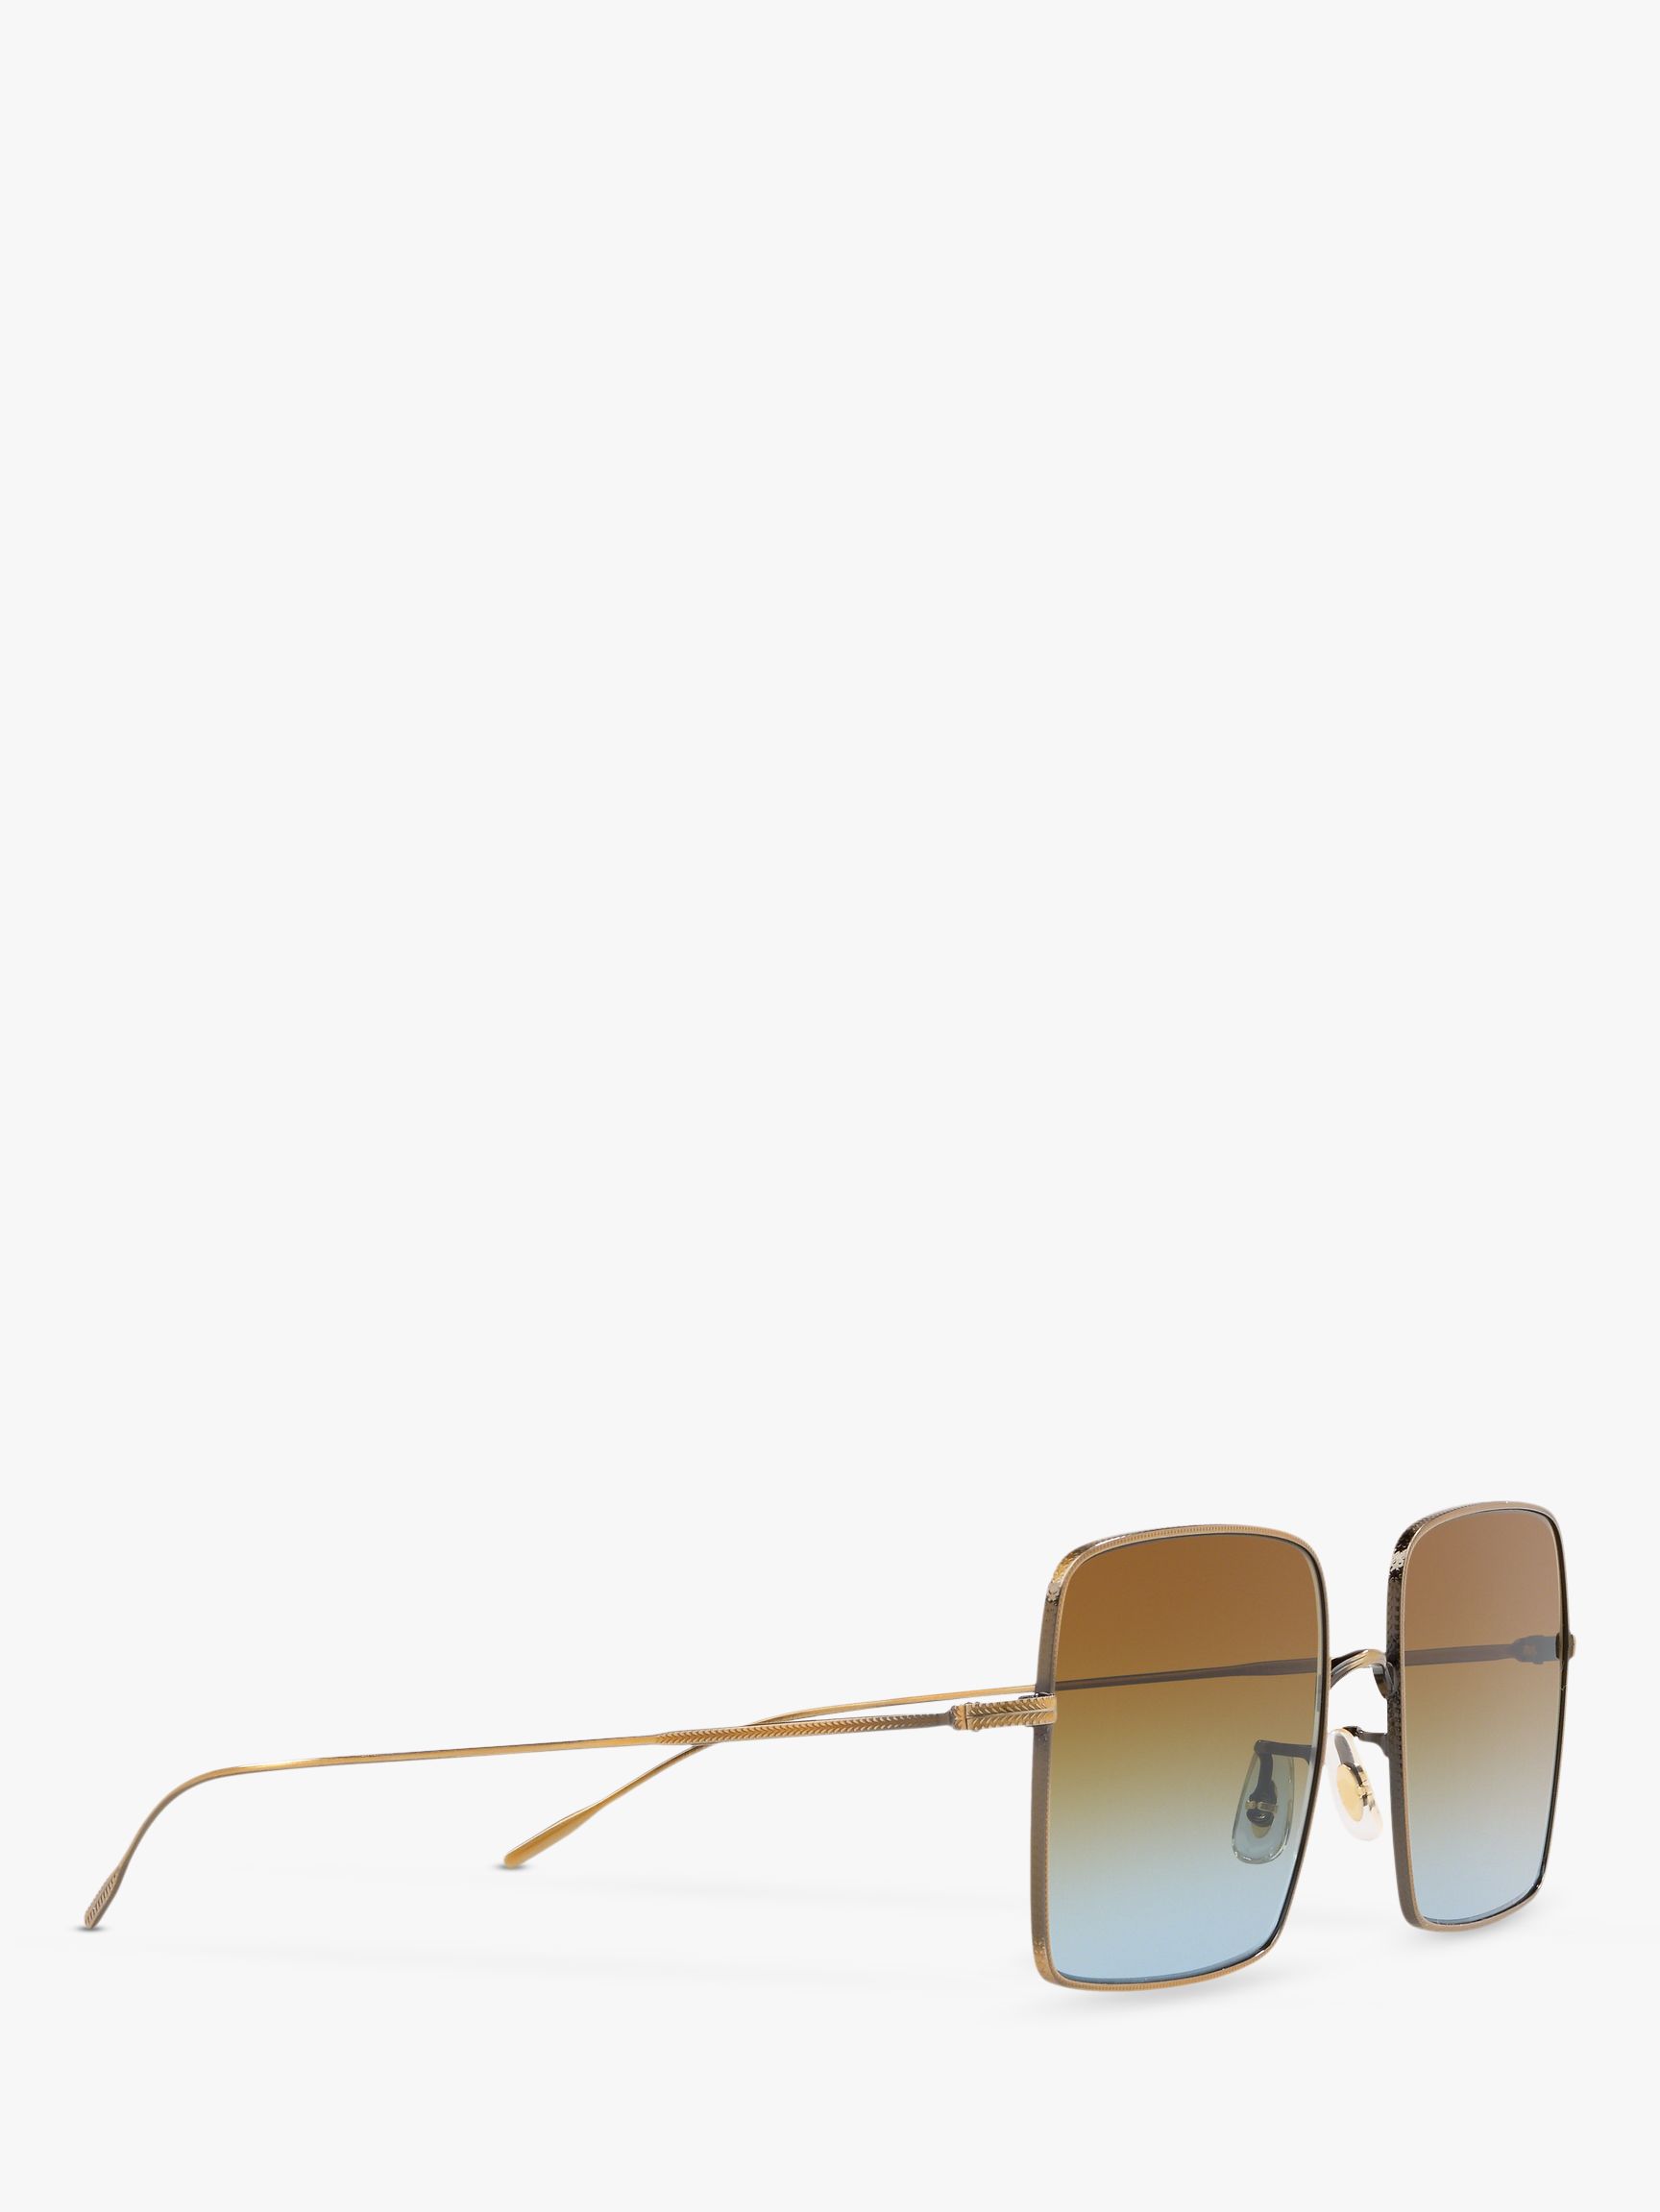 Oliver Peoples OV1236S Women's Rassine Oversized Square Sunglasses, Antique  Gold/Brown Gradient at John Lewis & Partners